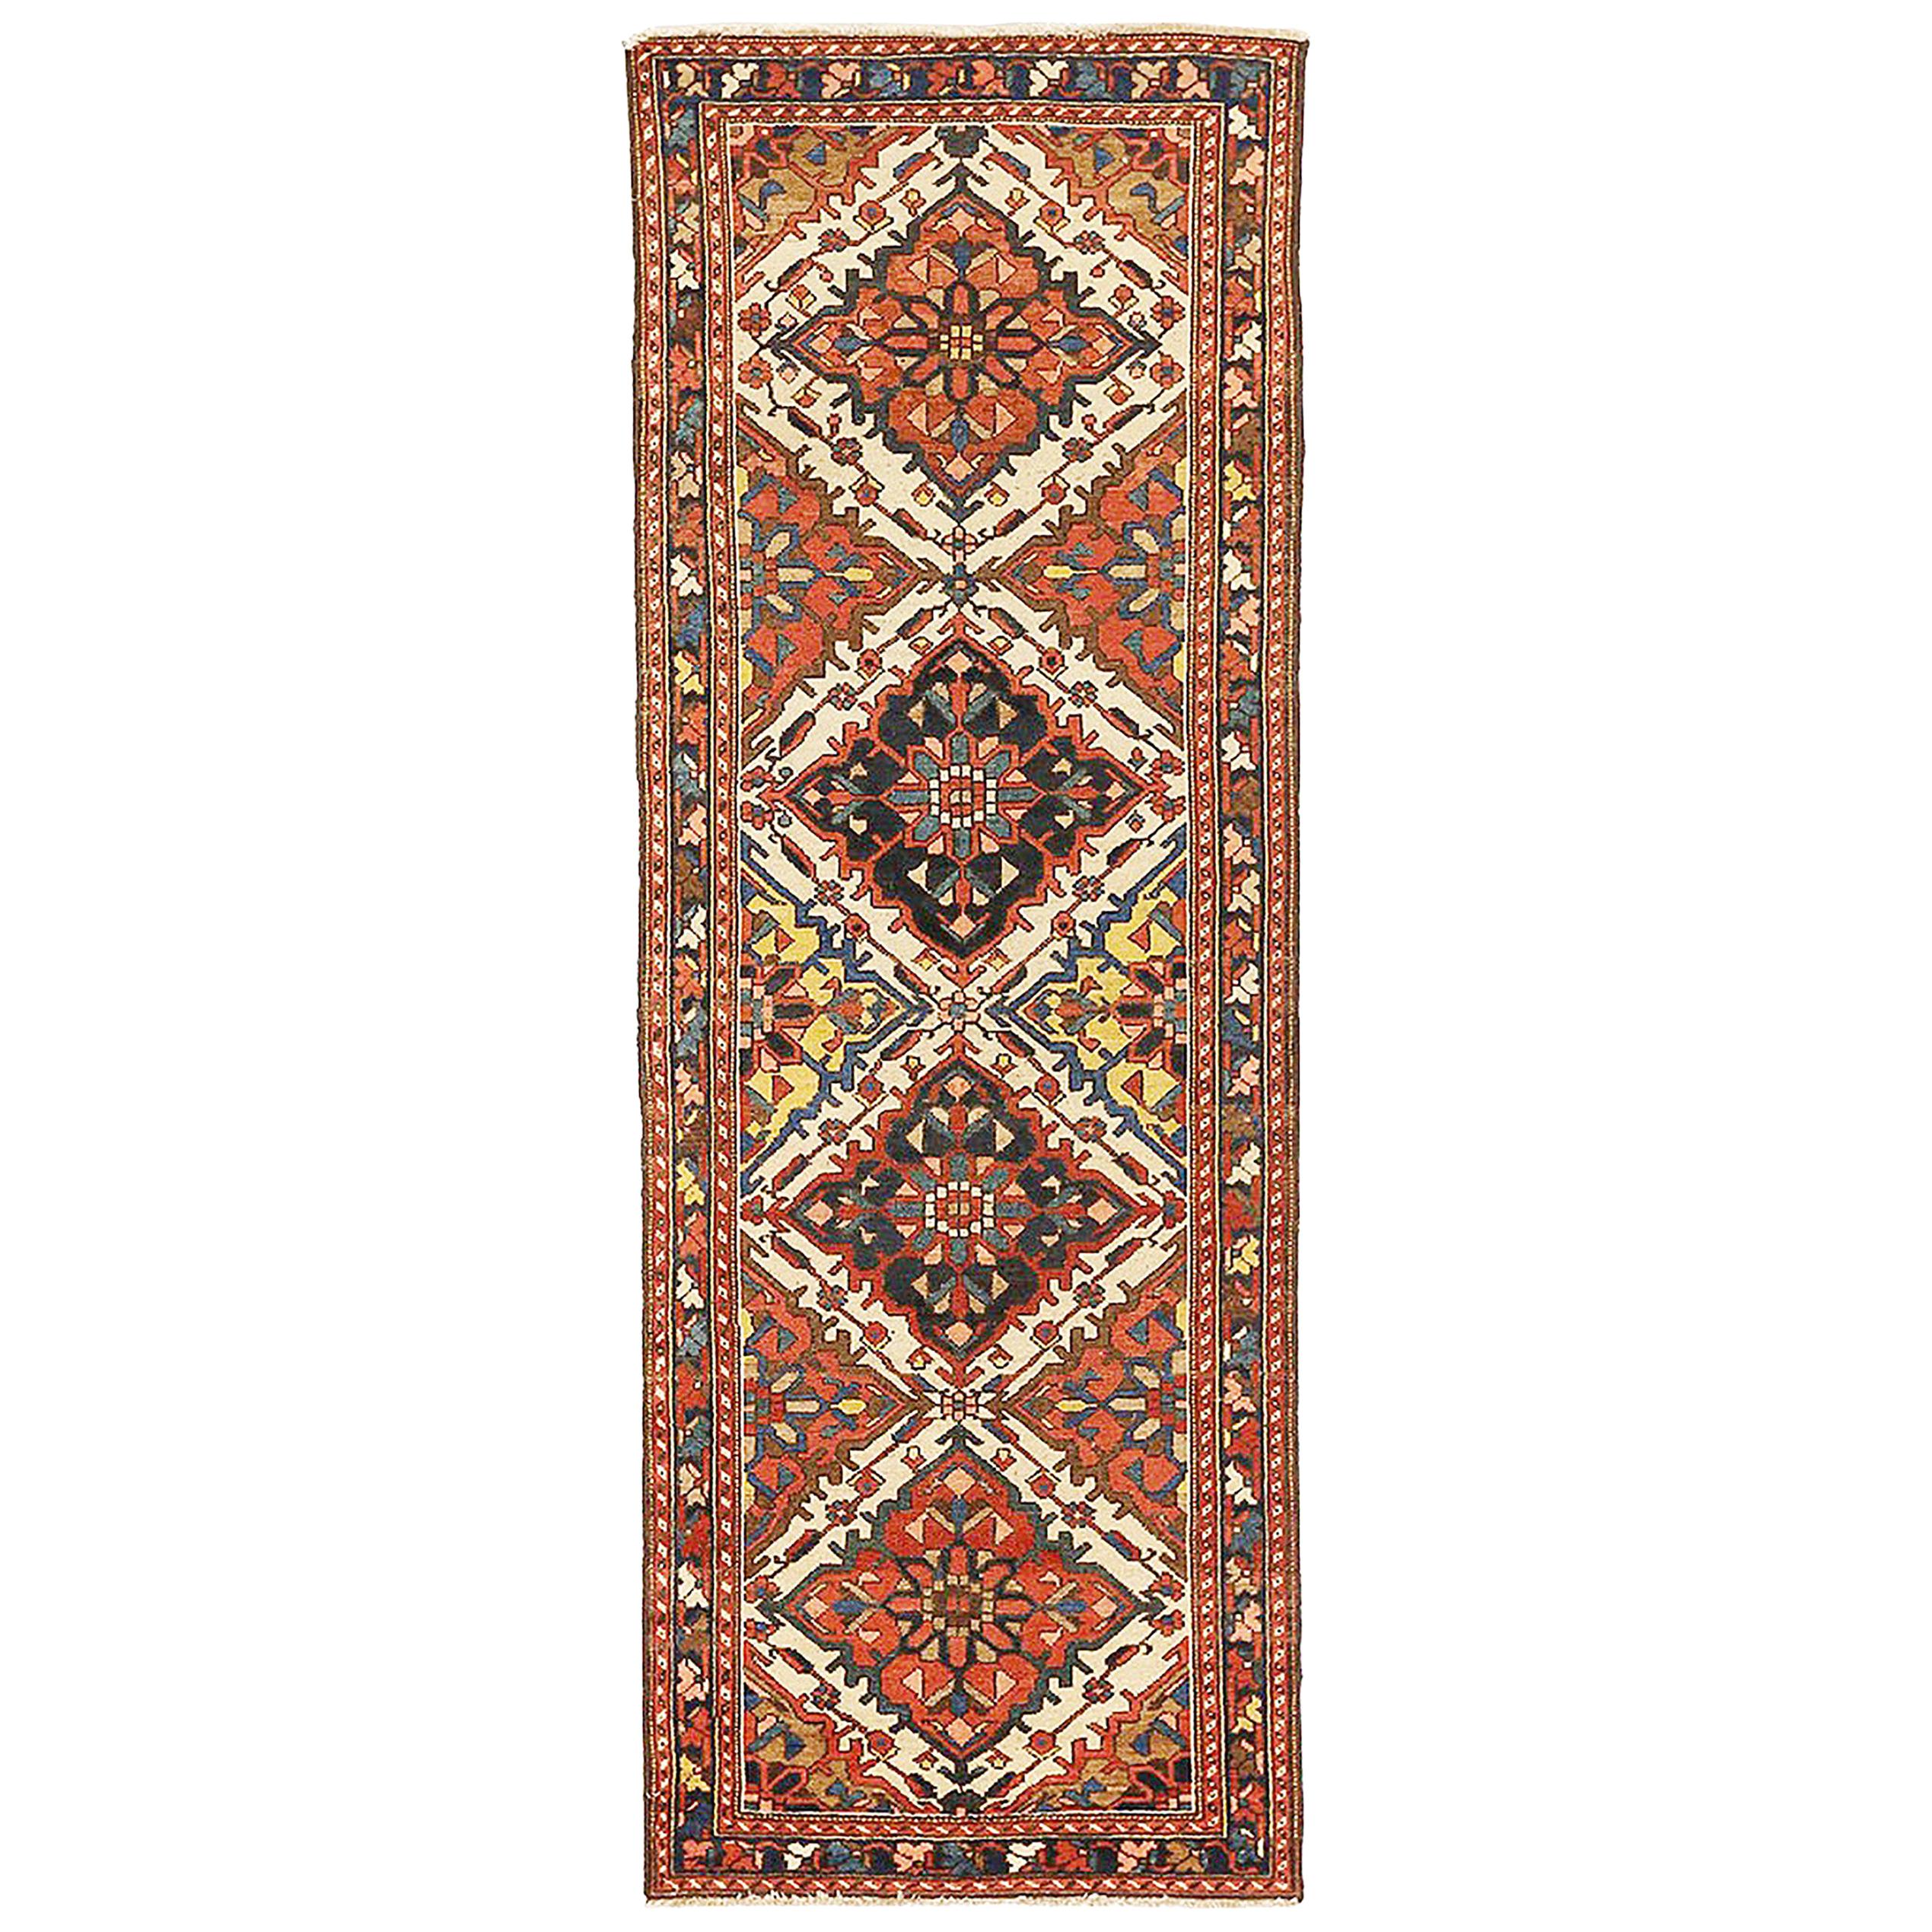 Antique Persian Bakhtiar Rug with Red and Navy Floral Details on Ivory Field